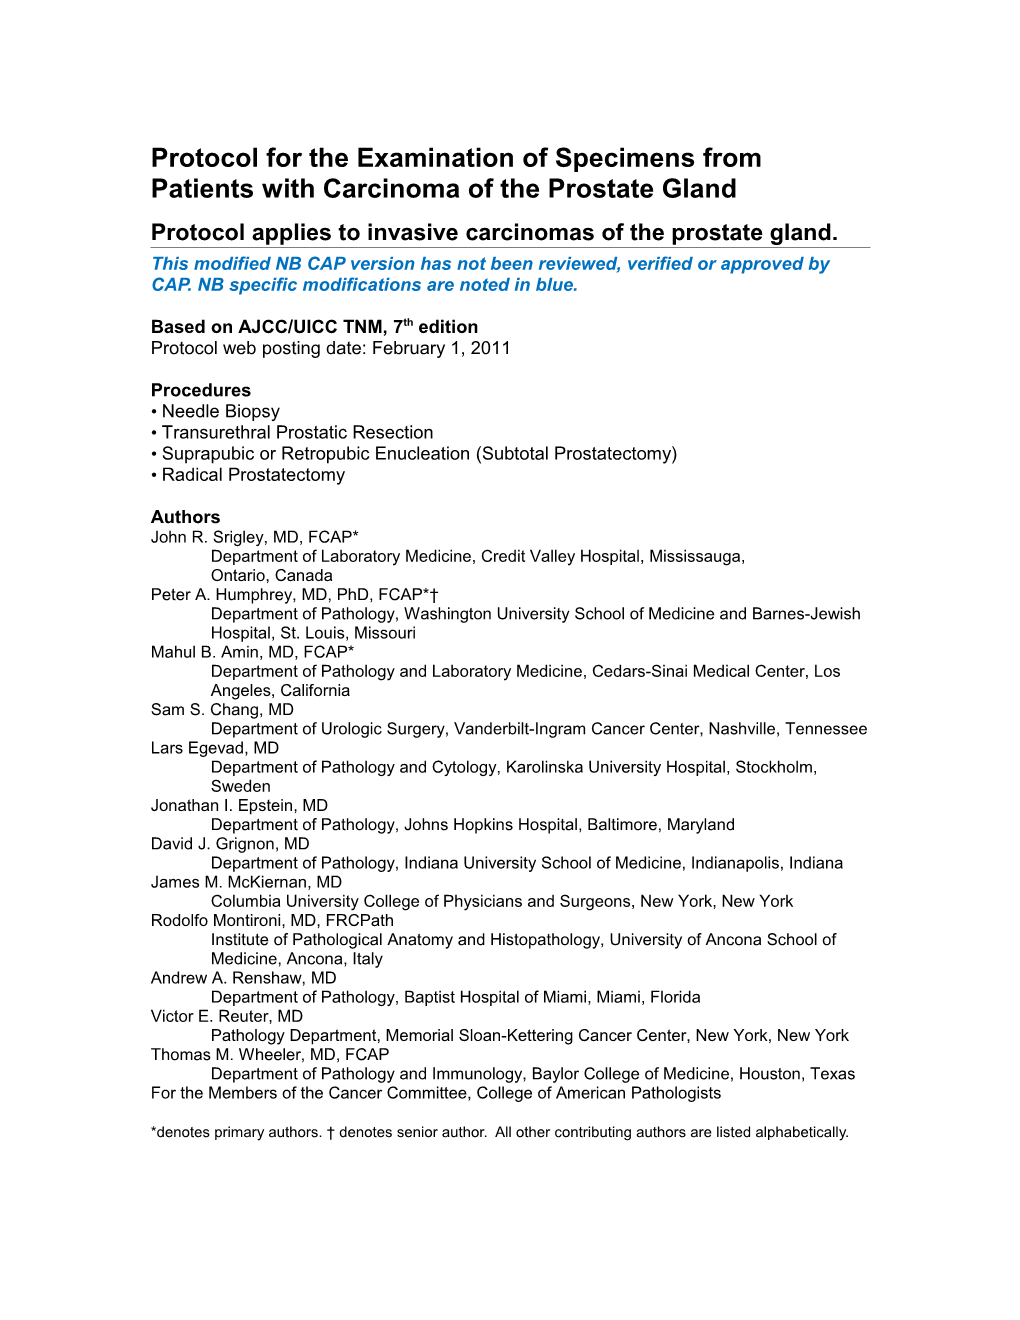 Protocol for the Examination of Specimens from Patientswith Carcinoma of the Prostate Gland